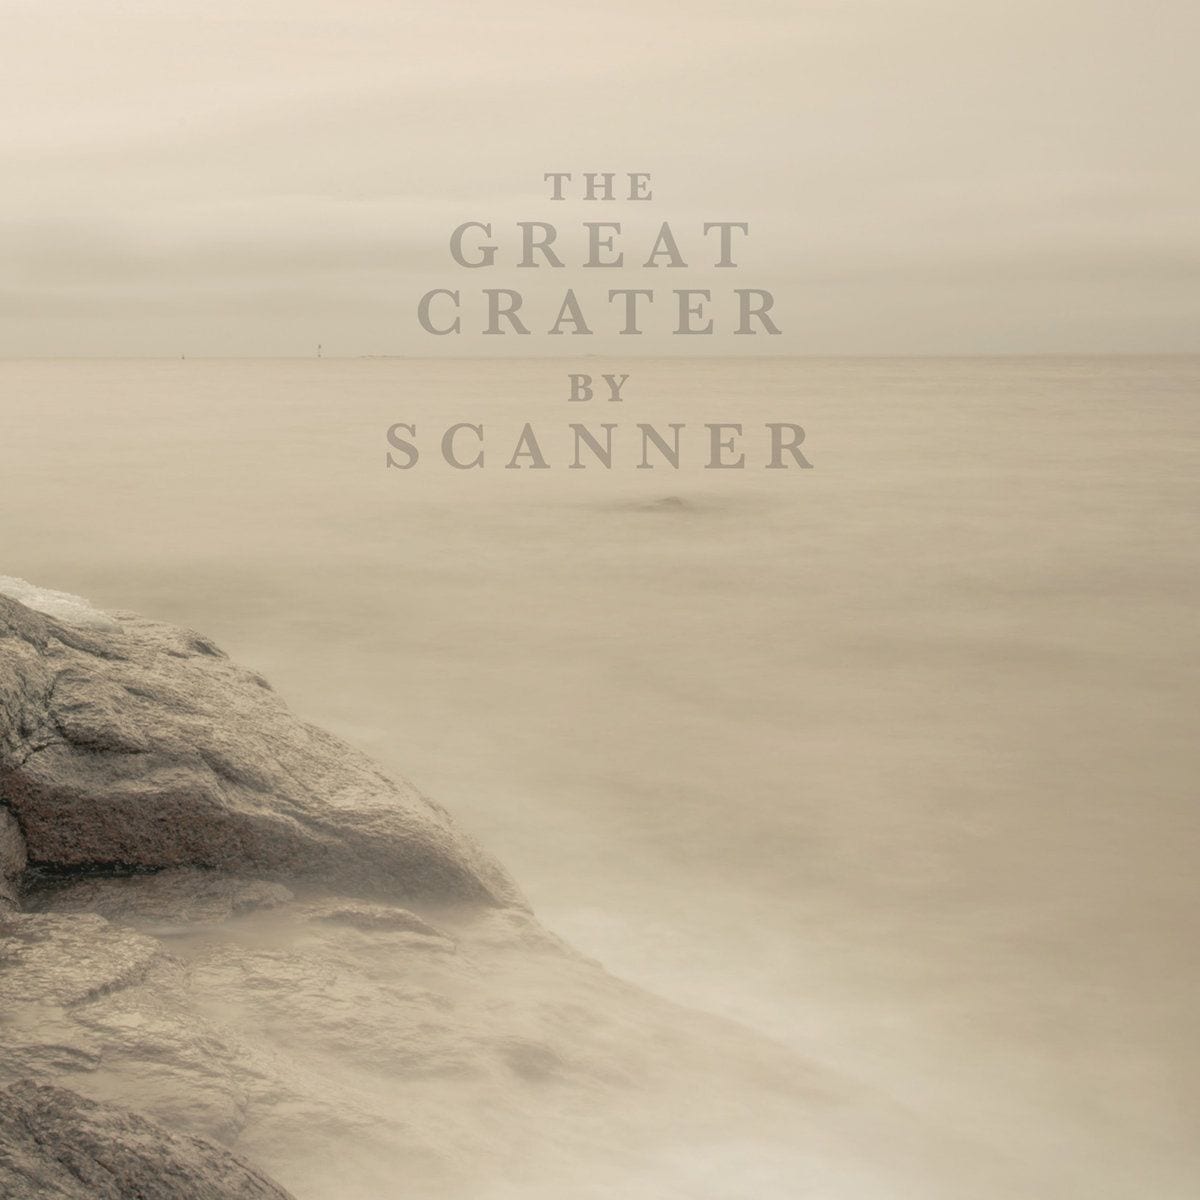 Scanner: The Great Crater